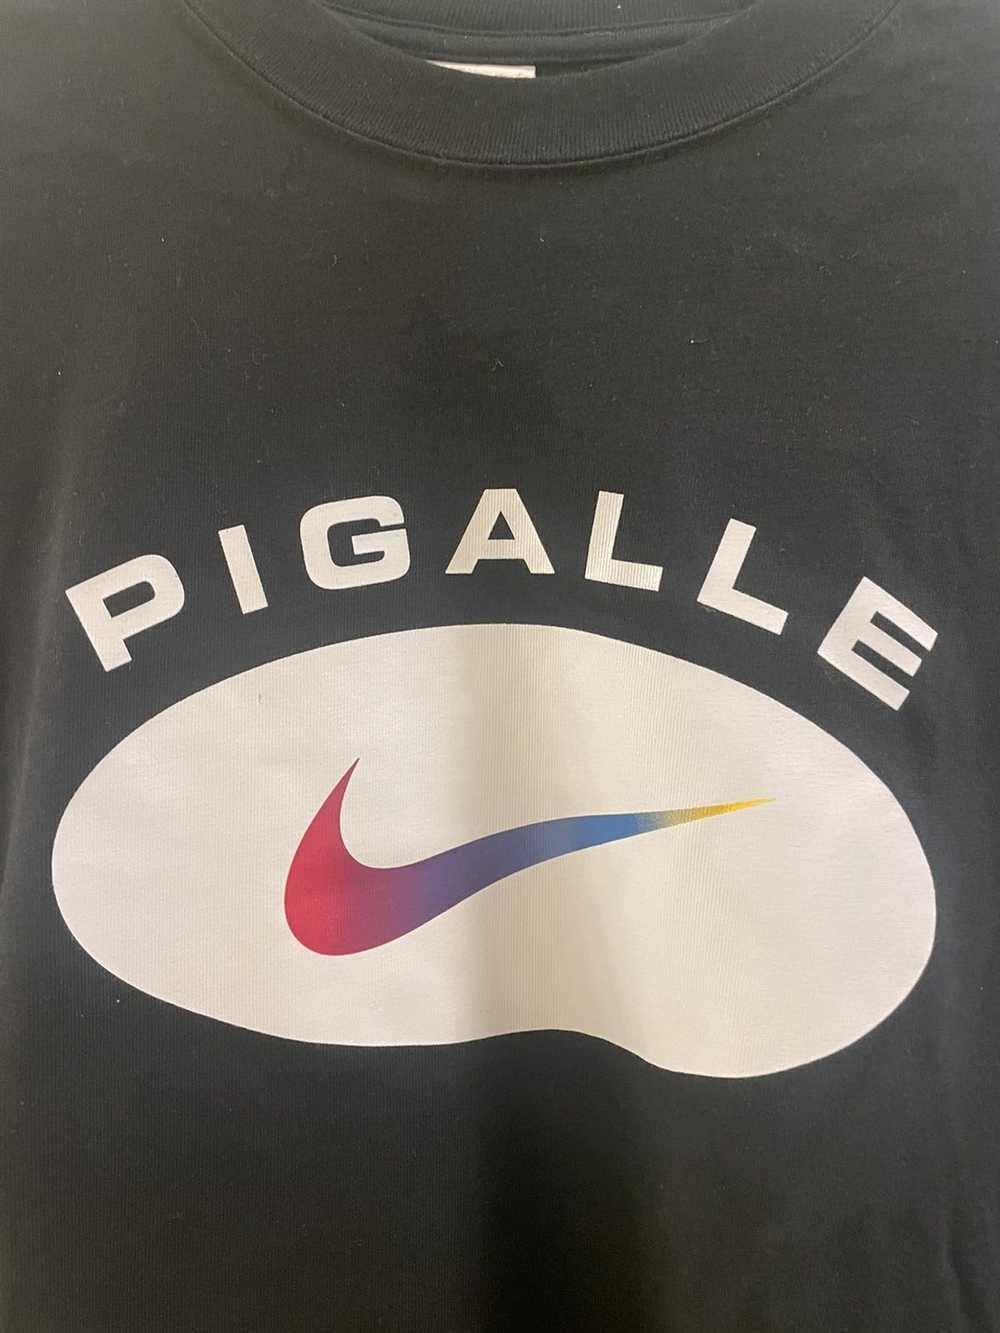 Nike × Pigalle Nike x Pigalle T-Shirt Black - image 2